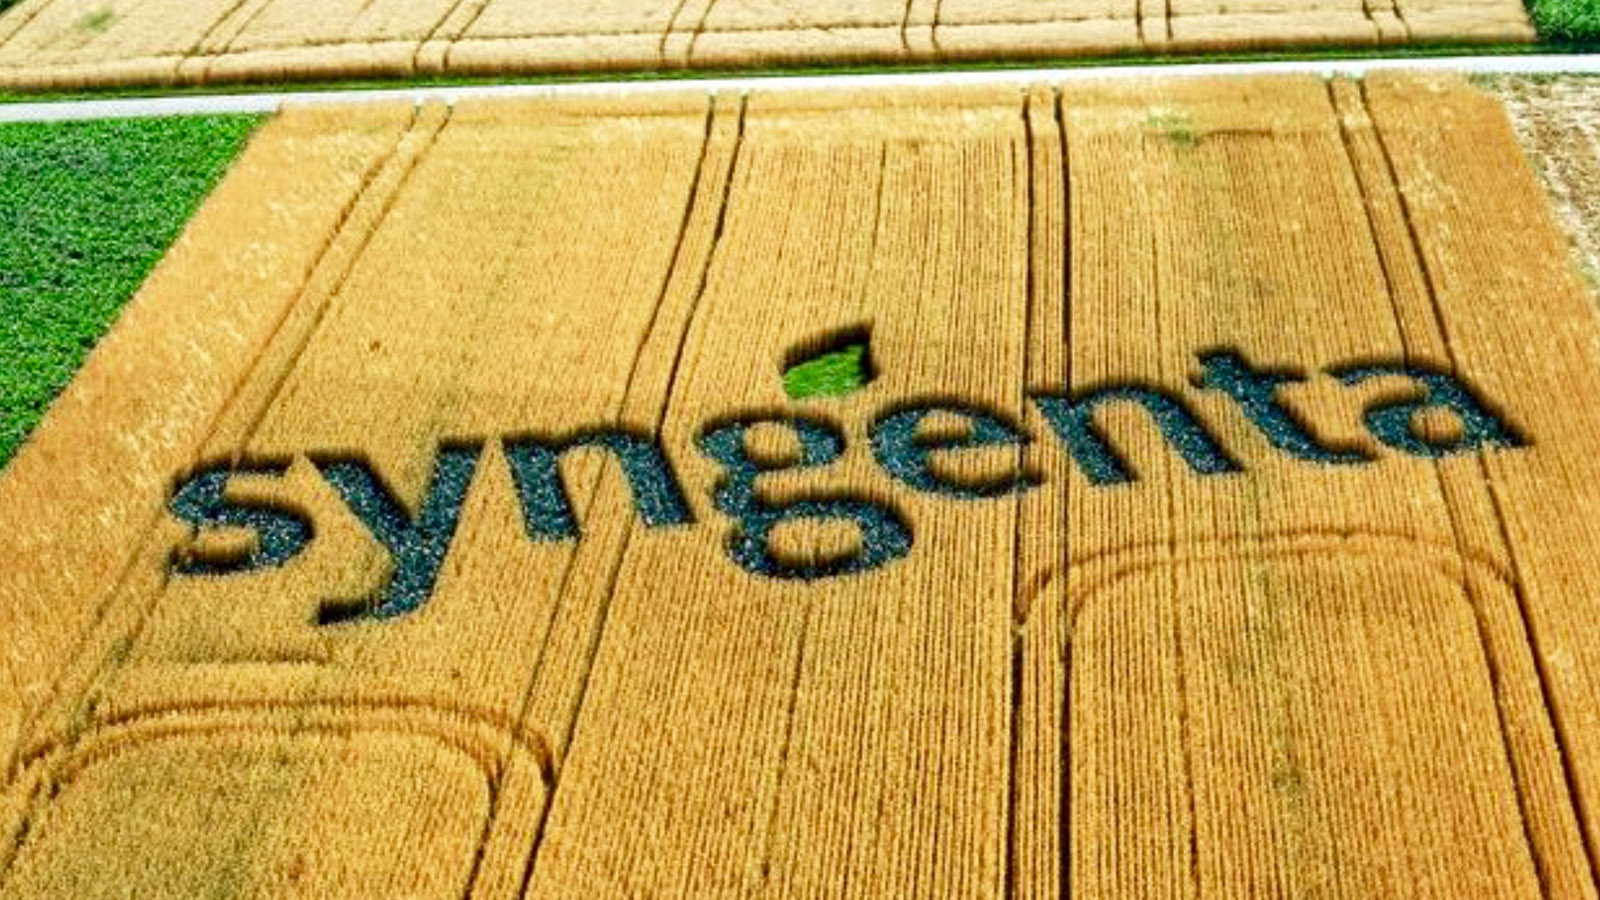 Chemchina Receives Us Approval For Syngenta Buyout